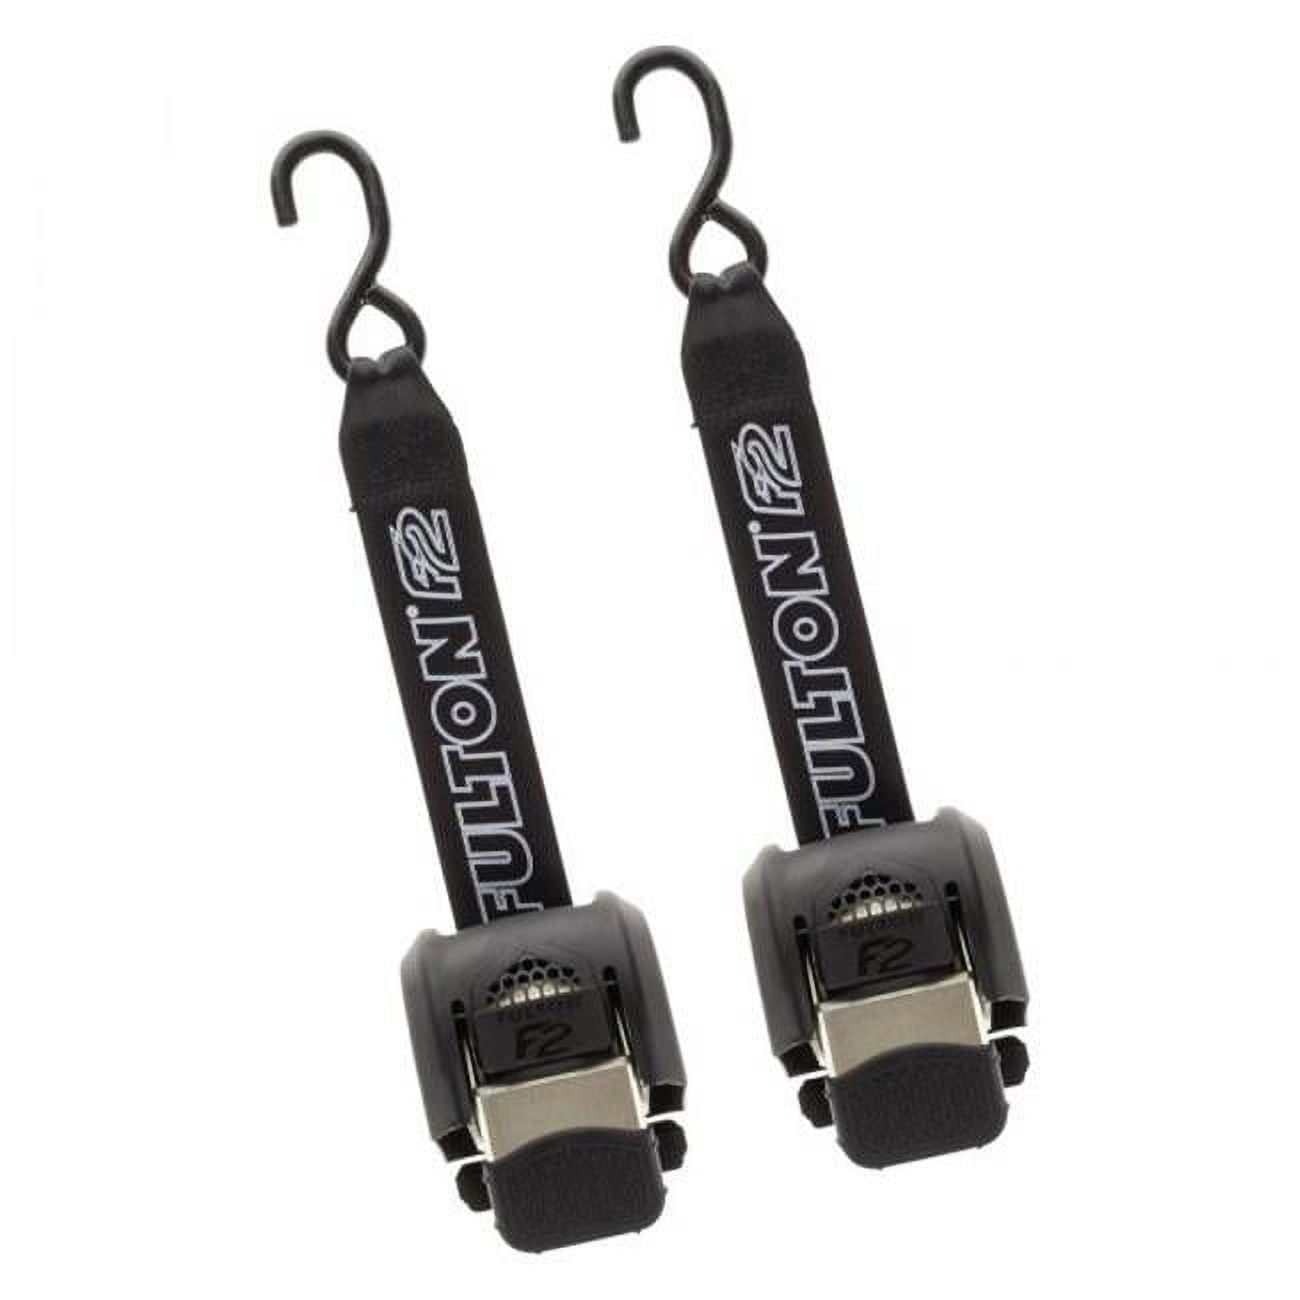 Immi 53008200 BoatBuckle Pro Series Transom Tie-Downs - 6 ft. x 2 in. 